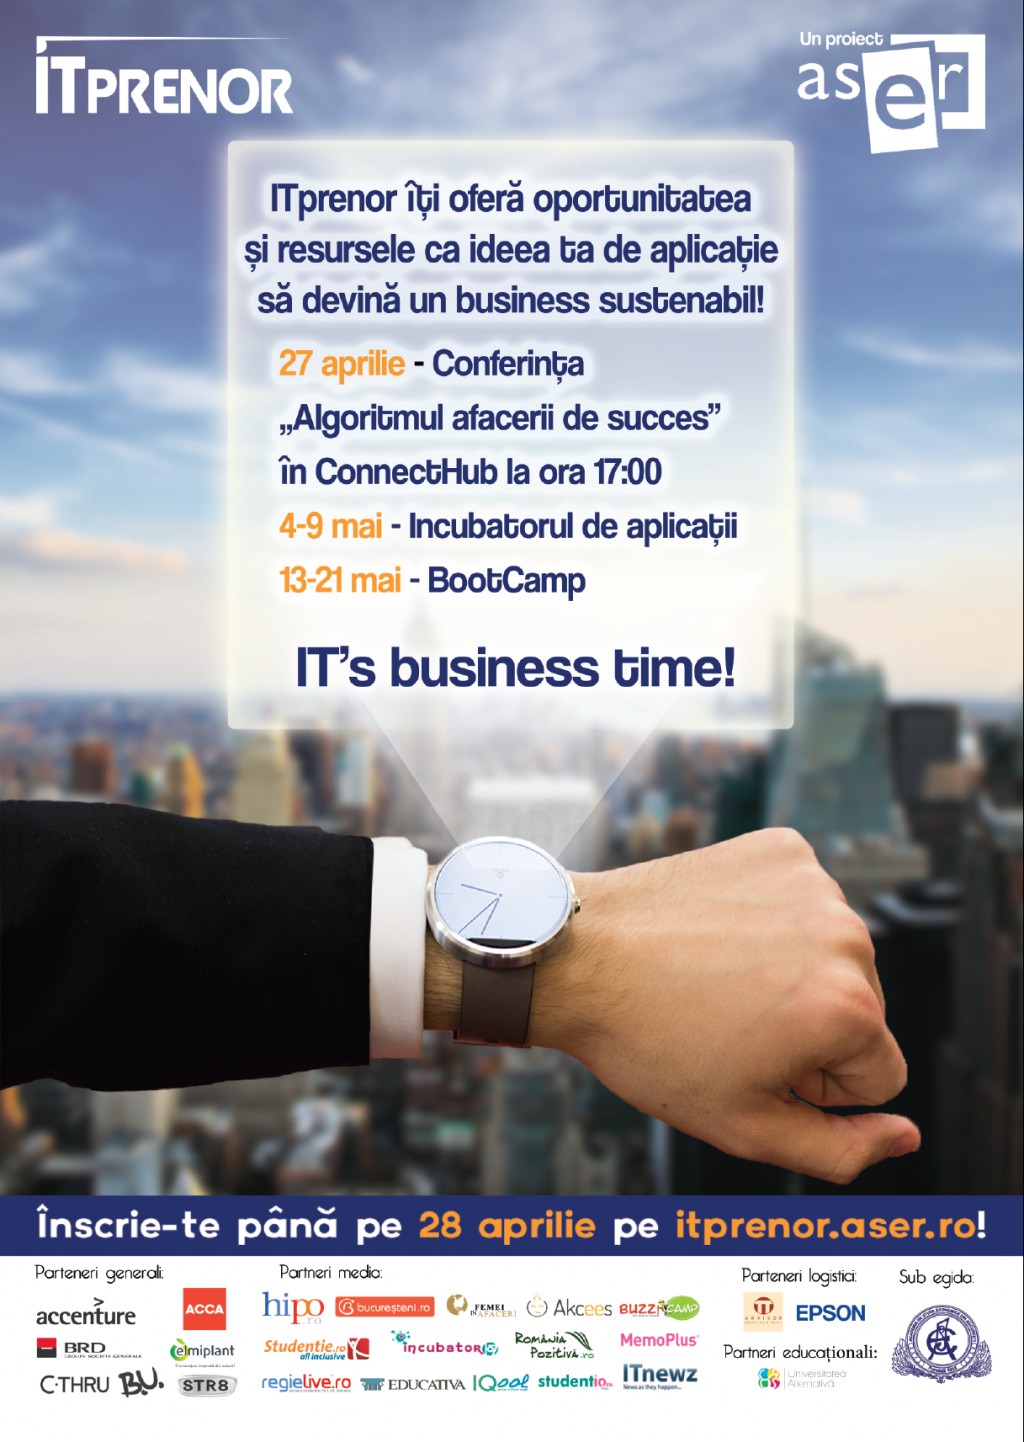 ITprenor - IT’s business time!